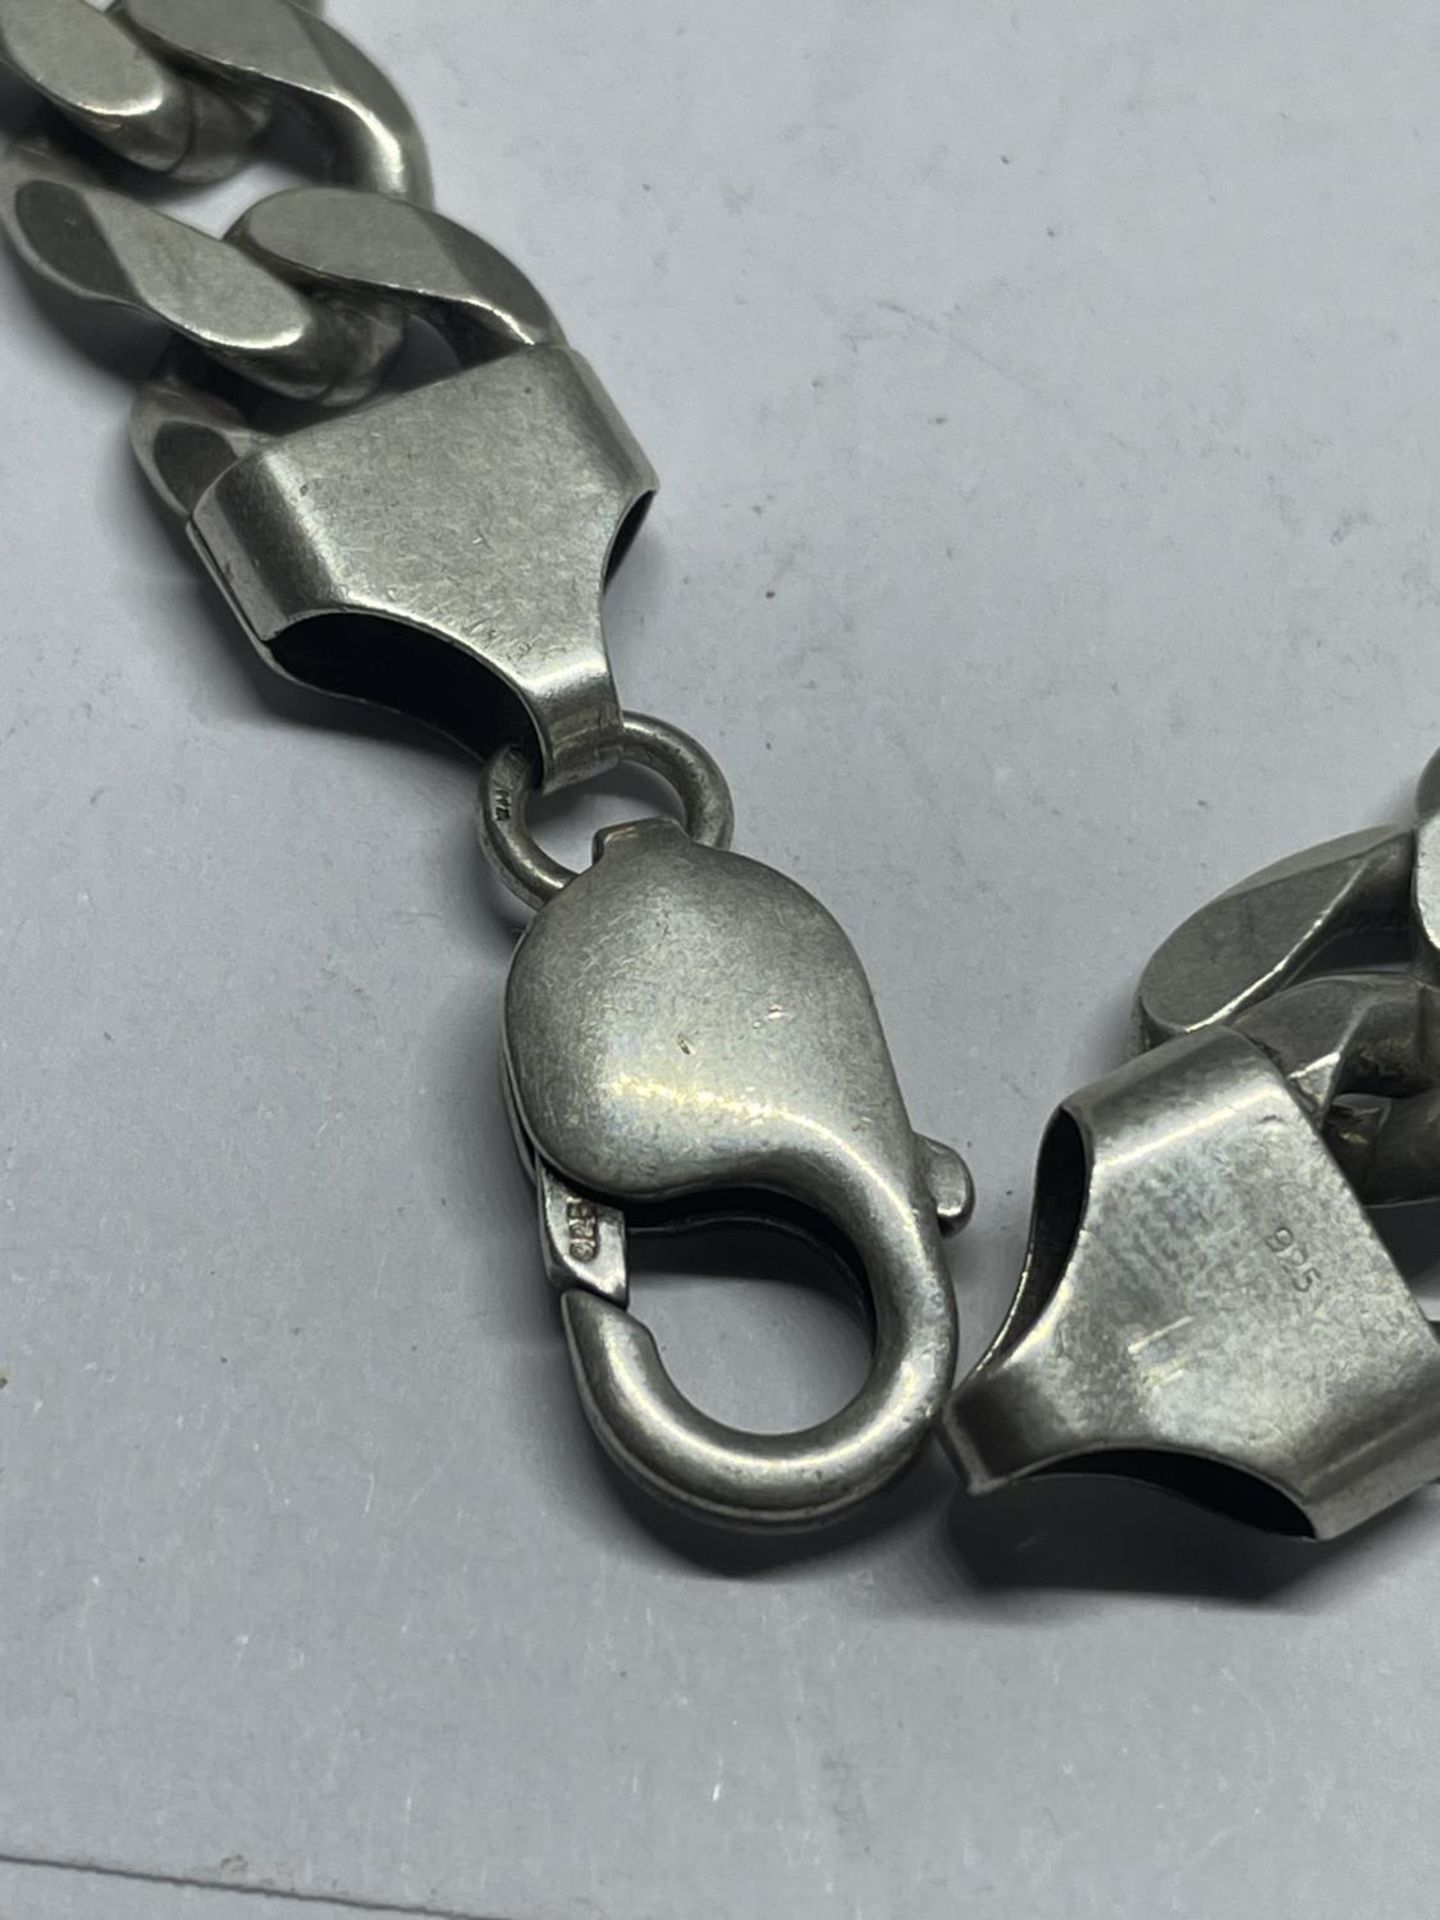 A HEAVY MARKED SILVER FLAT LINK NECKLACE LENGTH 56CM WEIGHT 92.9 GRAMS - Image 3 of 3